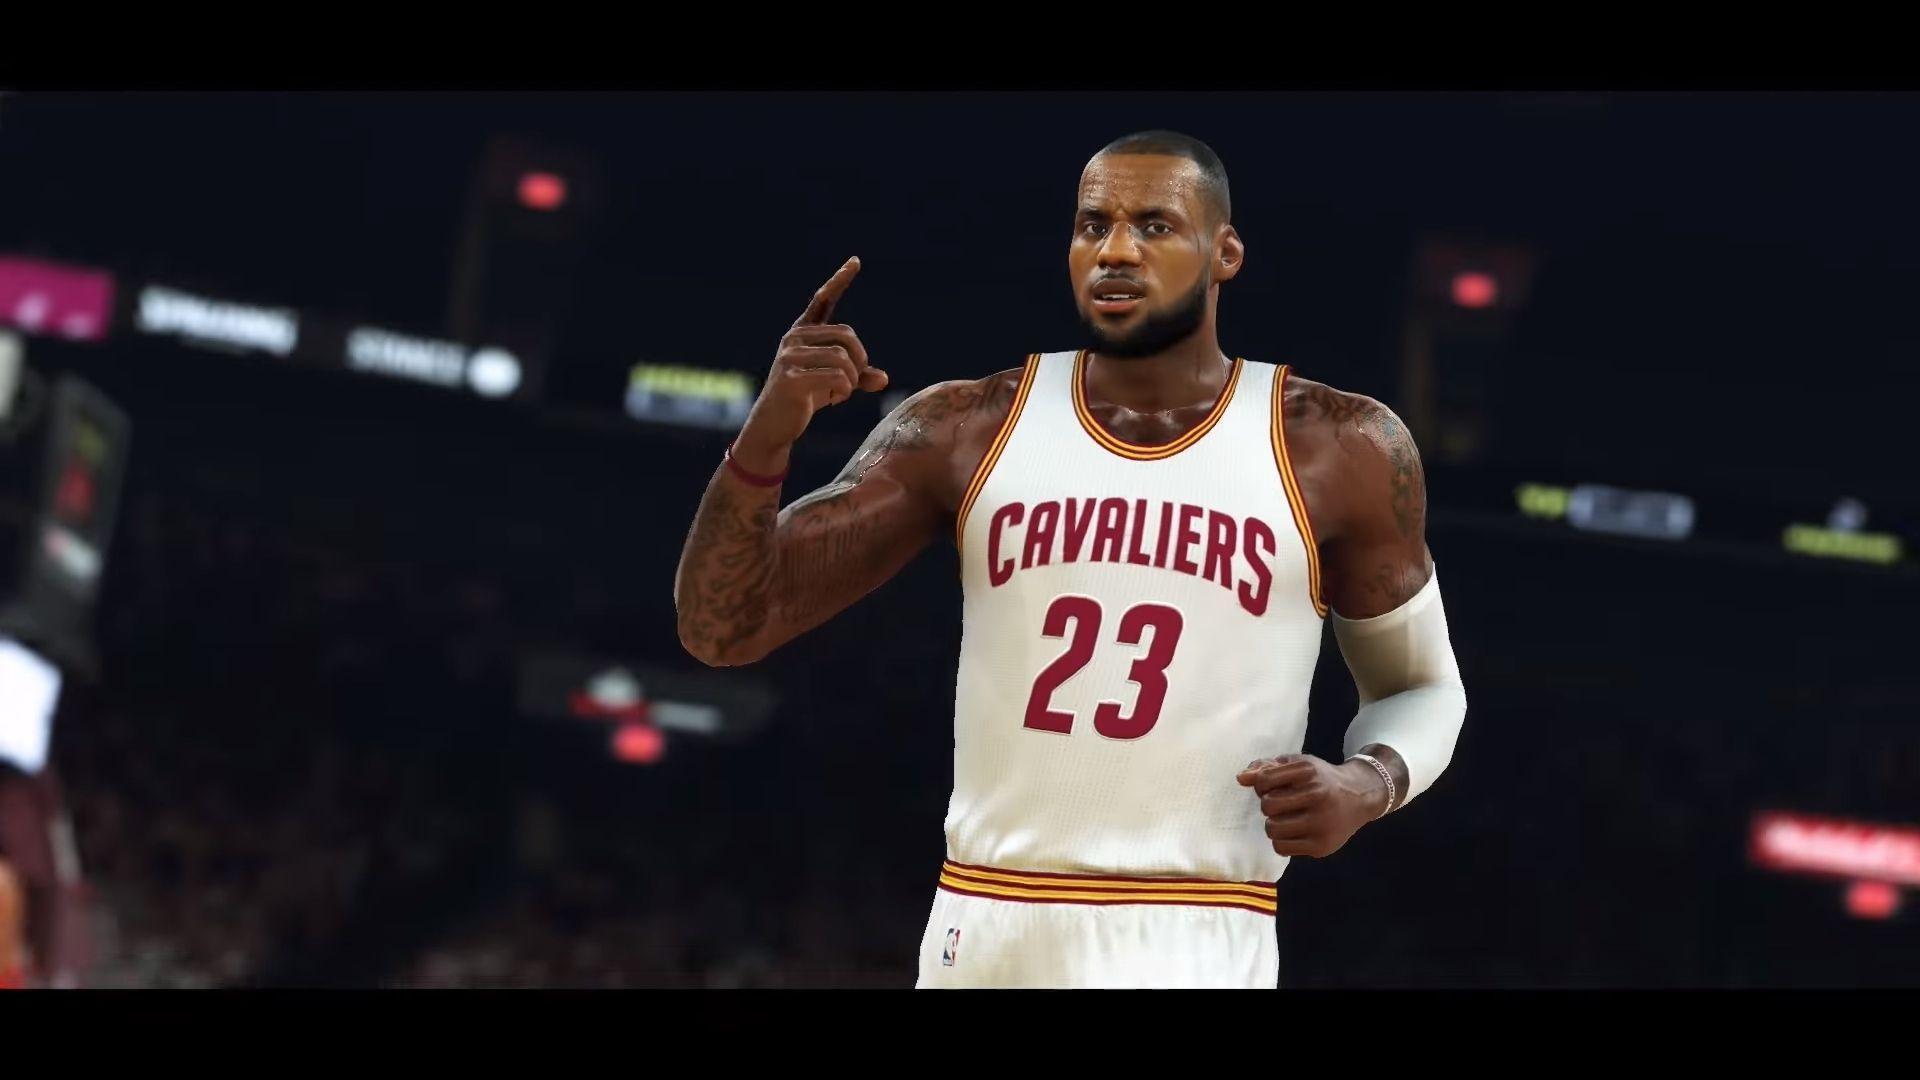 NBA 2K17 Includes Some Friction